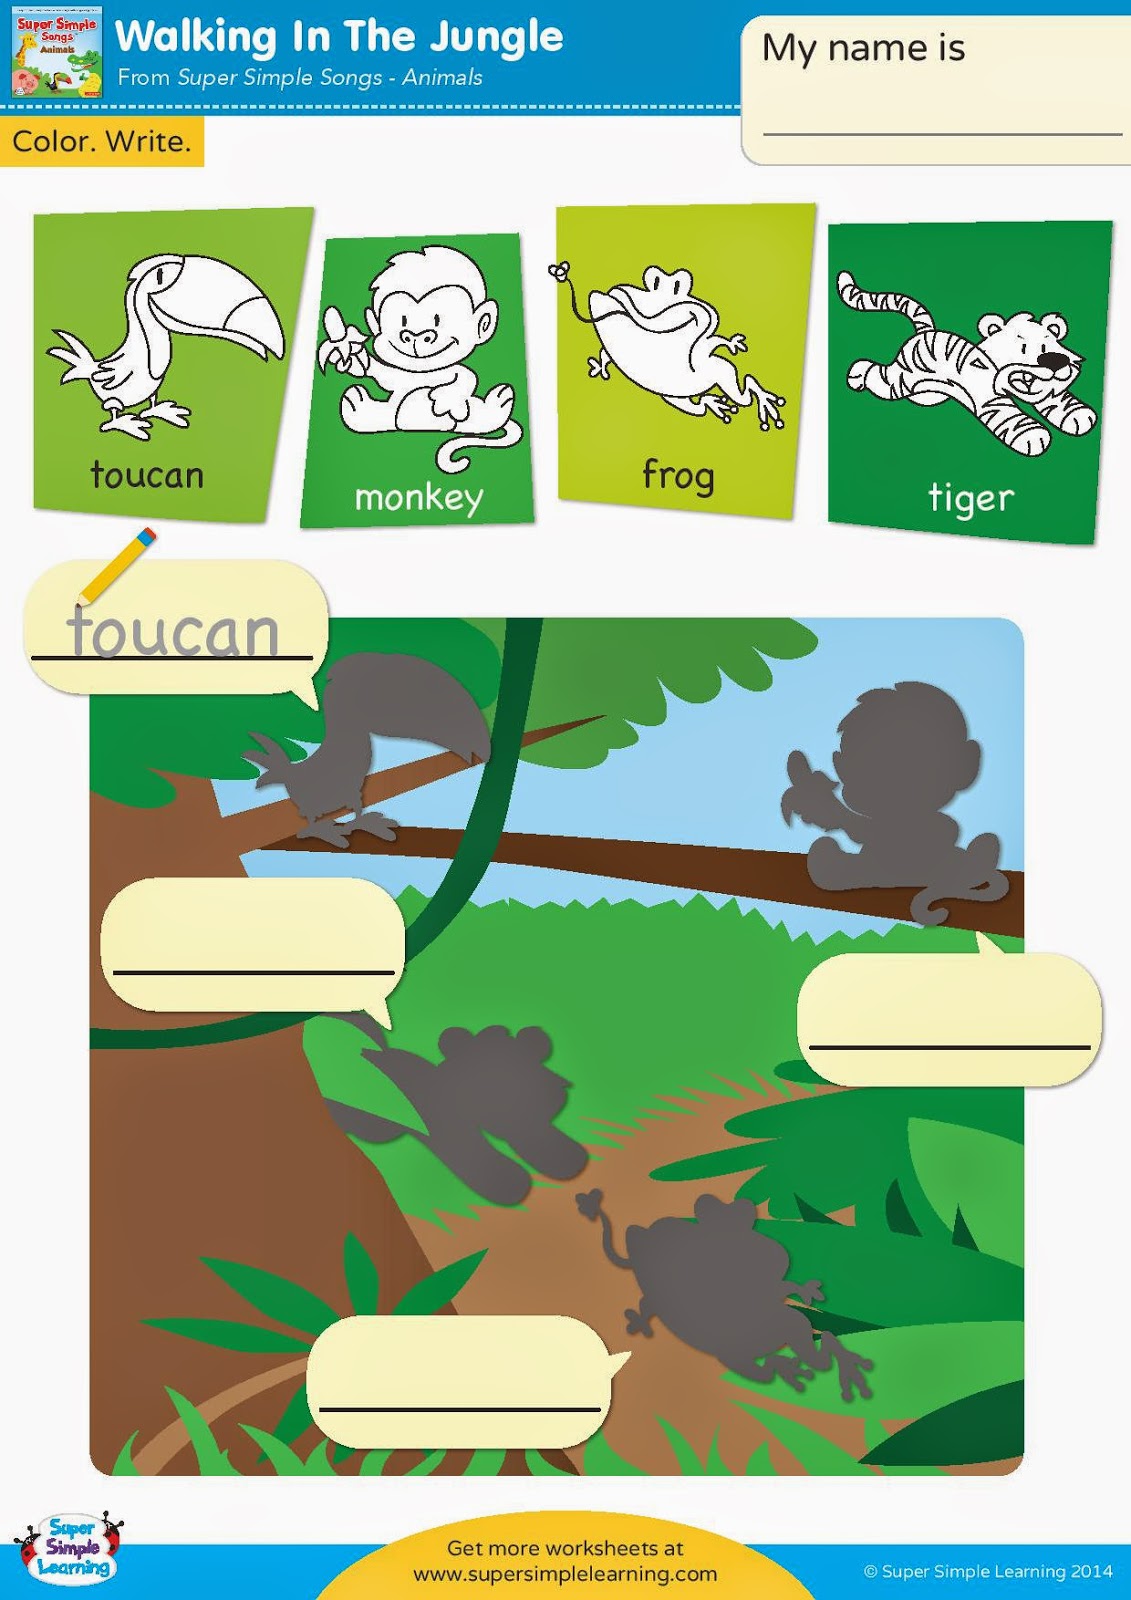 In the jungle текст. Walking in the Jungle super simple Worksheets. Walking in the Jungle super simple Songs Worksheets. Walking in the Jungle. Walking in the Jungle super simple Songs.